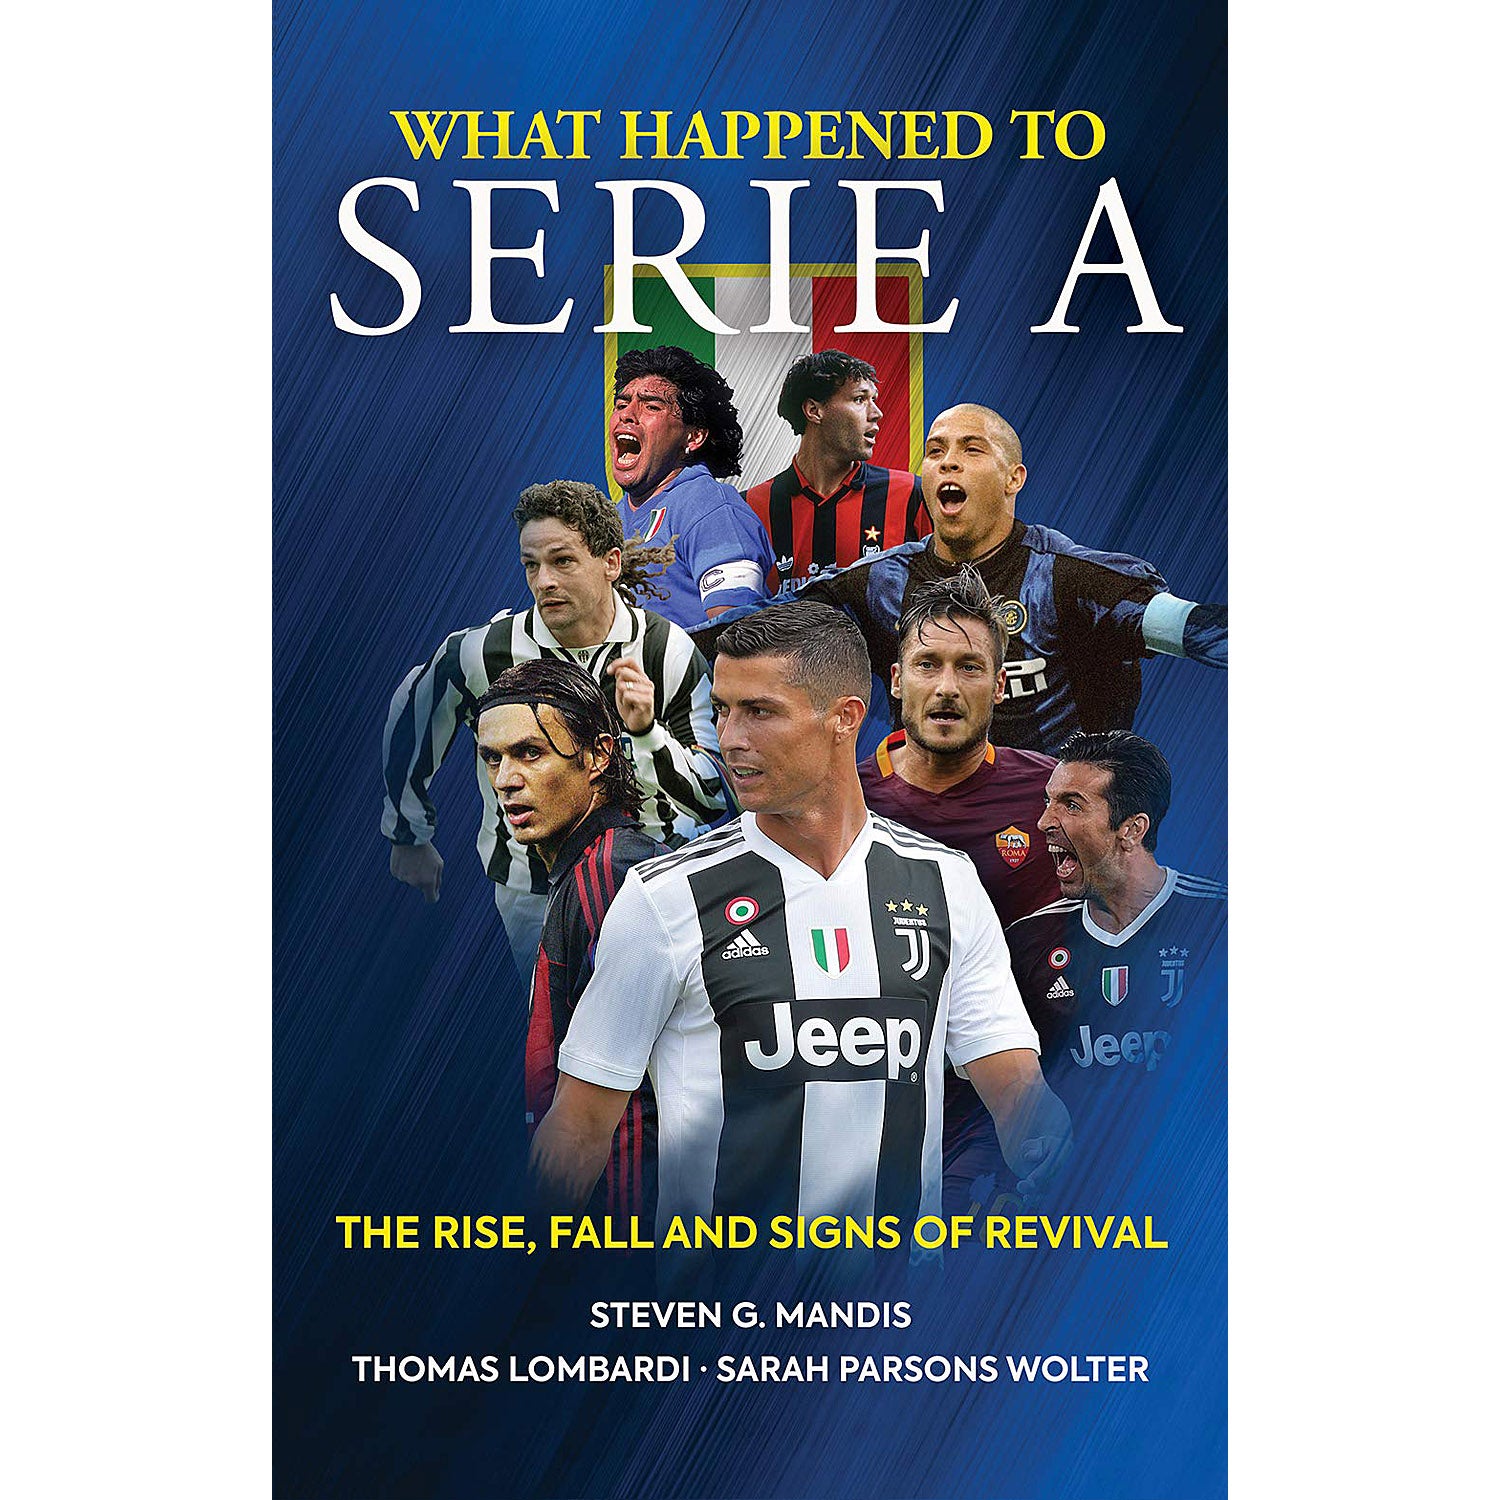 What Happened to Serie A – The Rise, Fall and Signs of Revival